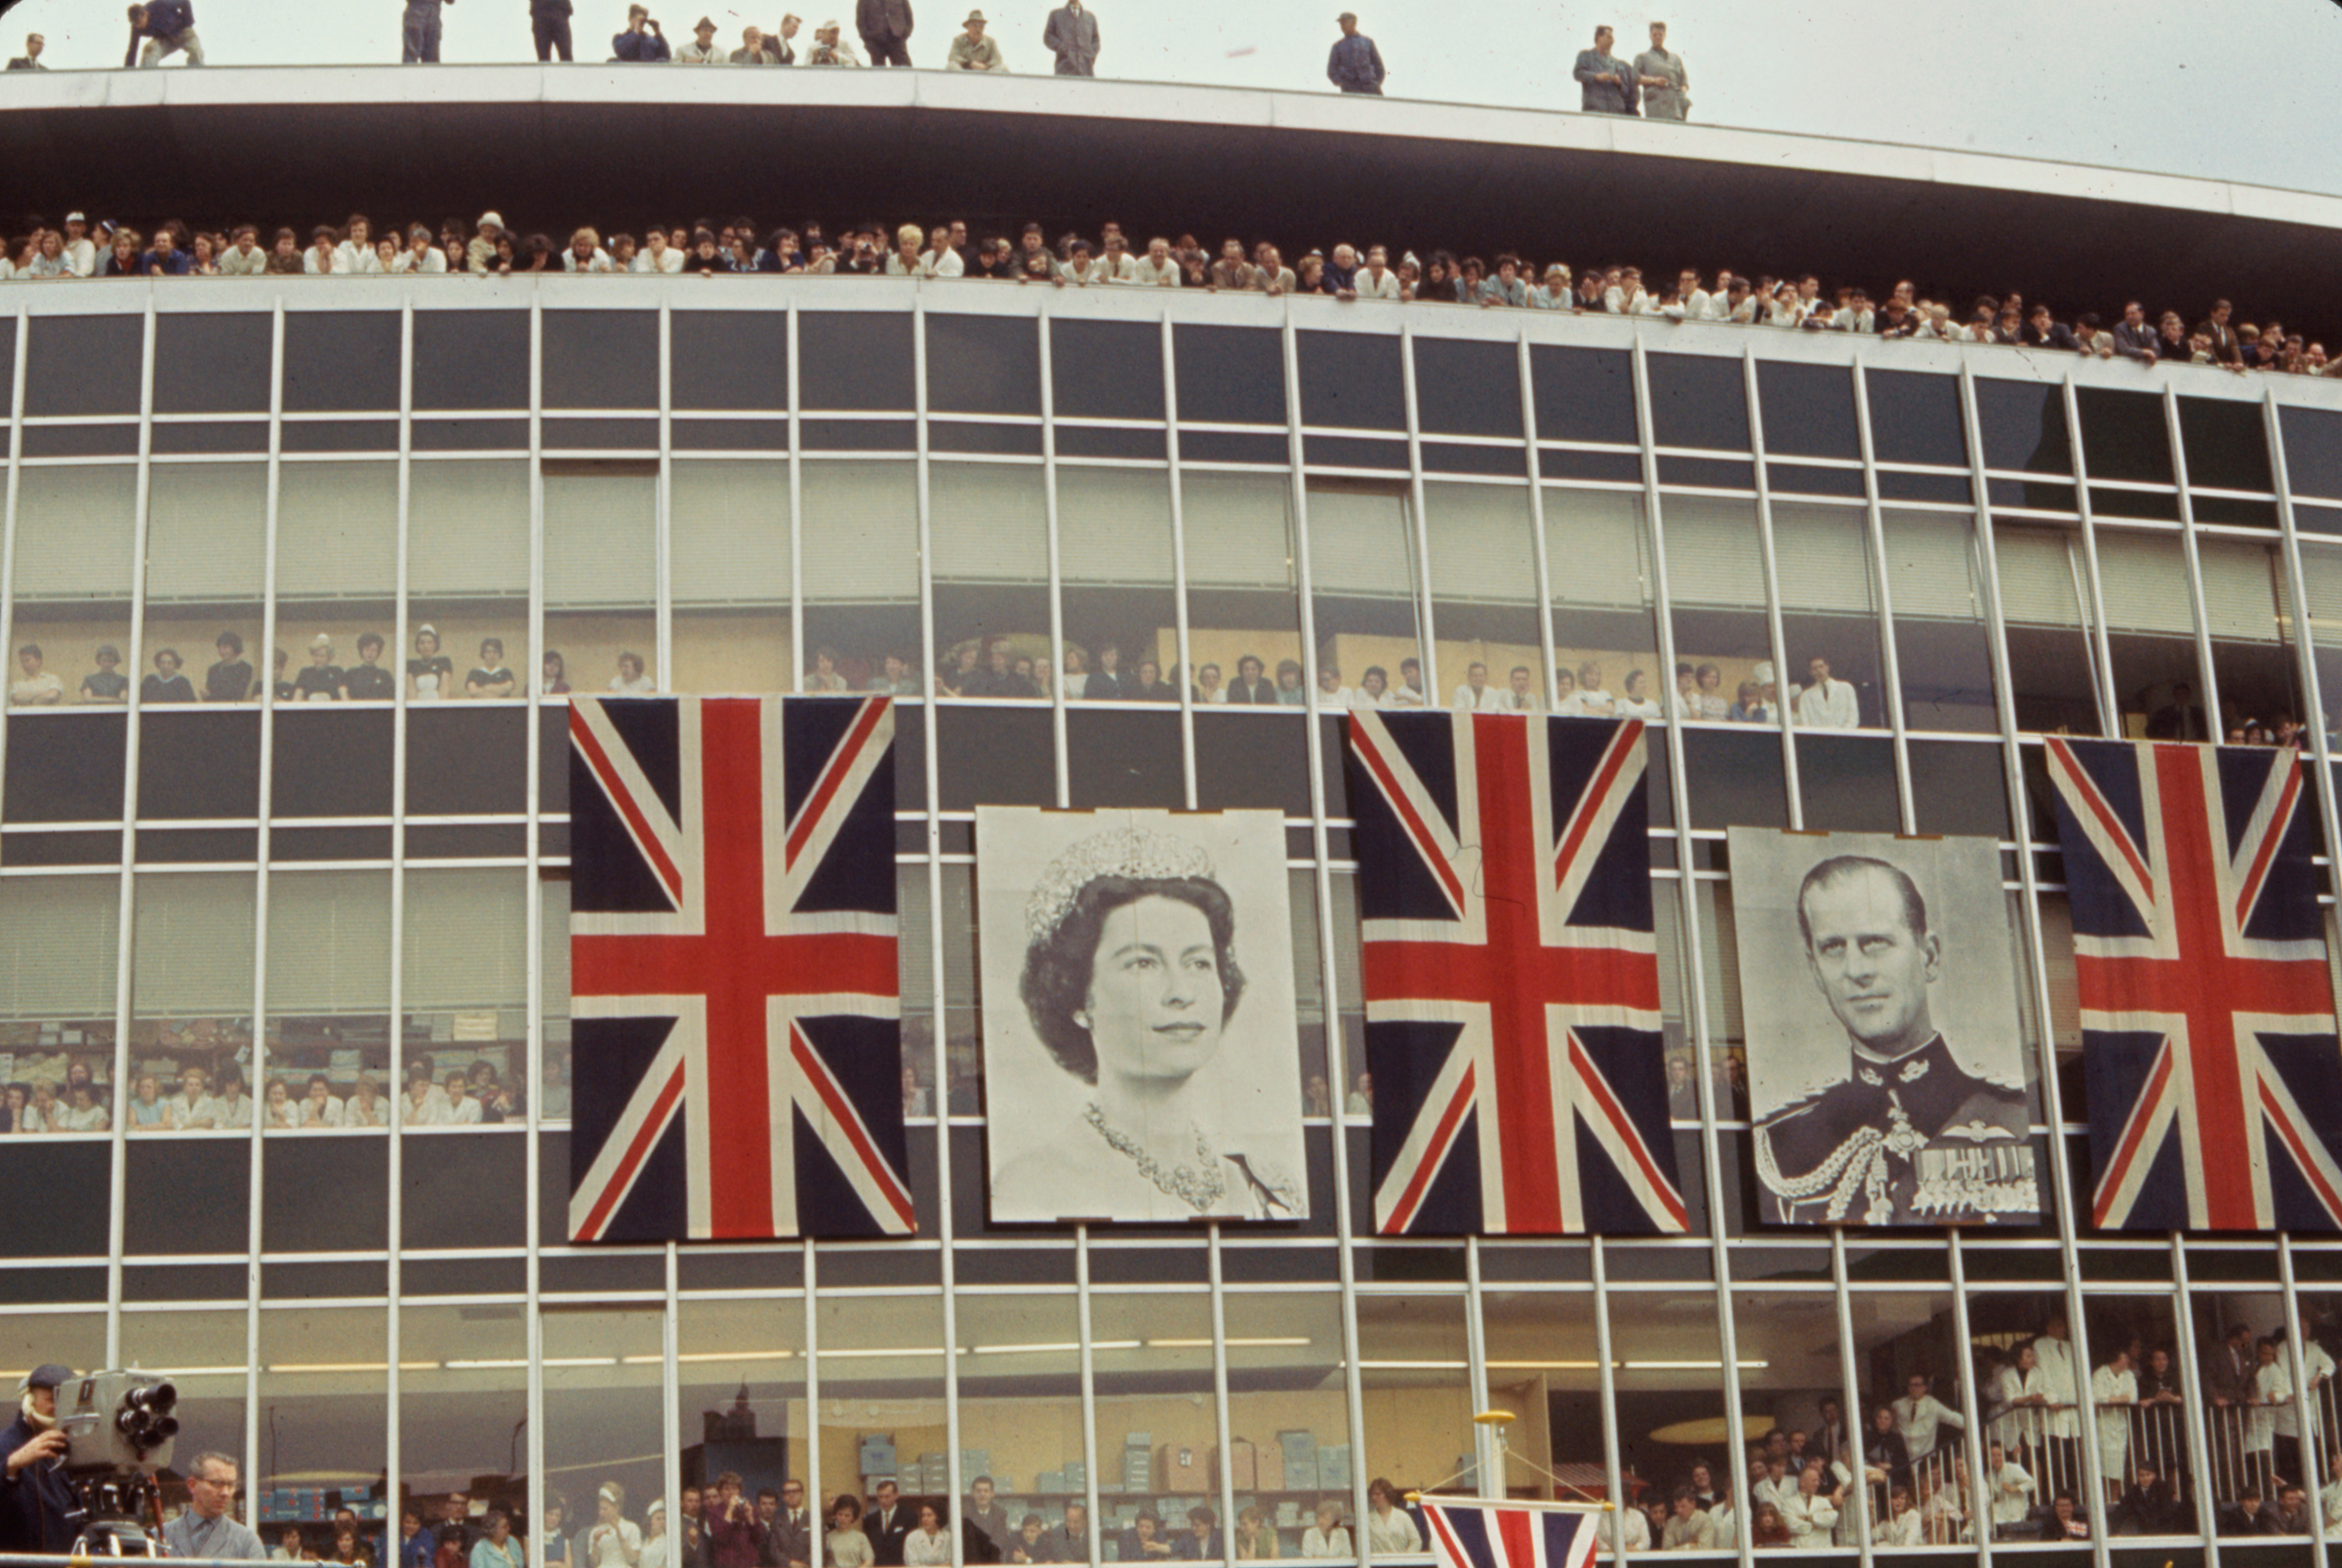 Crowds peer out windows and balconies to catch a glimpse of Queen Elizabeth II and Prince Philip, Bonn, Germany, May 1965. (Paul Schutzer—The LIFE Picture Collection/Getty Images)